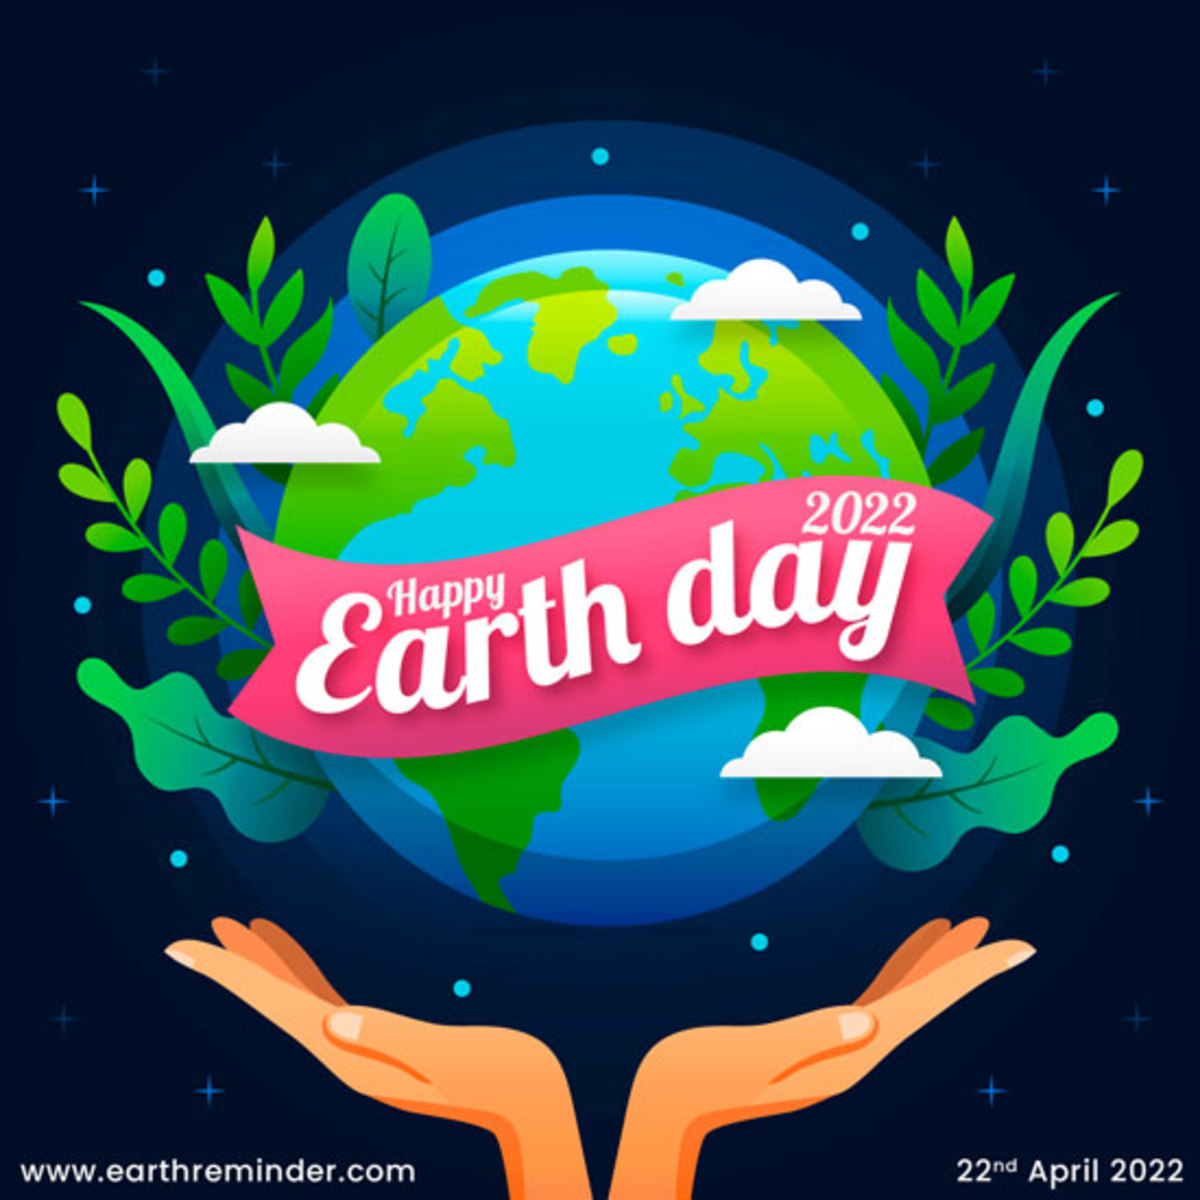 Earth Day April 22, 2022: Invest In Our Planet